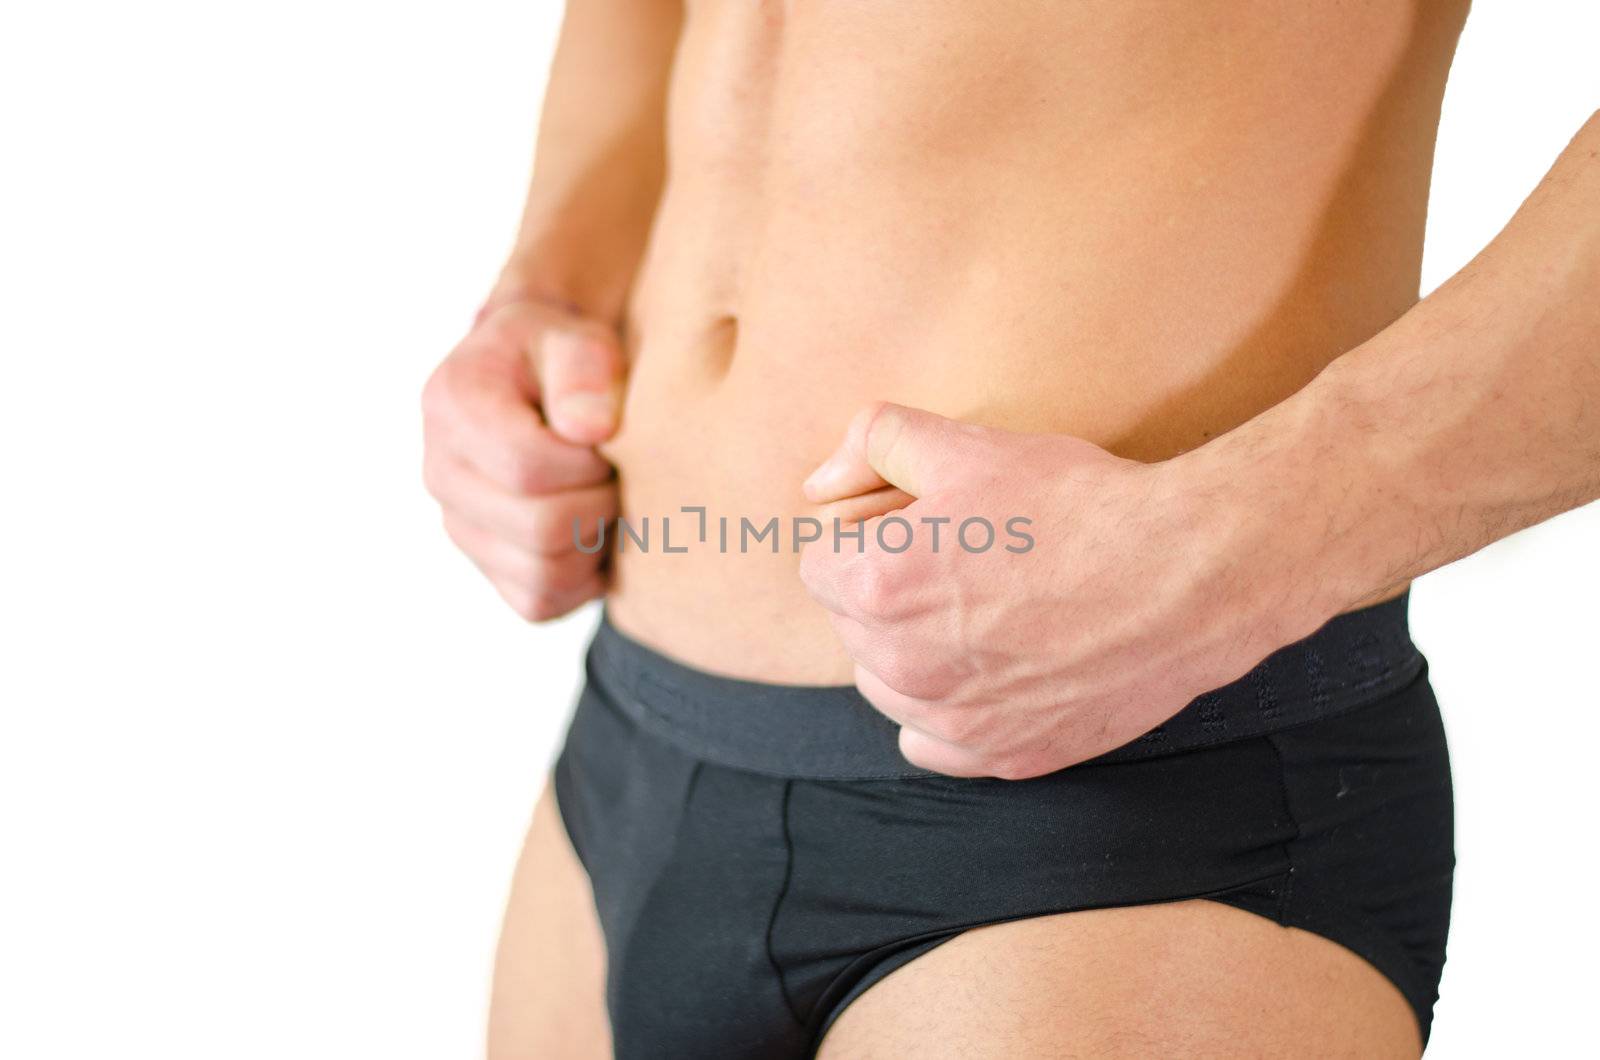 Fit, athletic young man pinching his stomach skin and showing abs